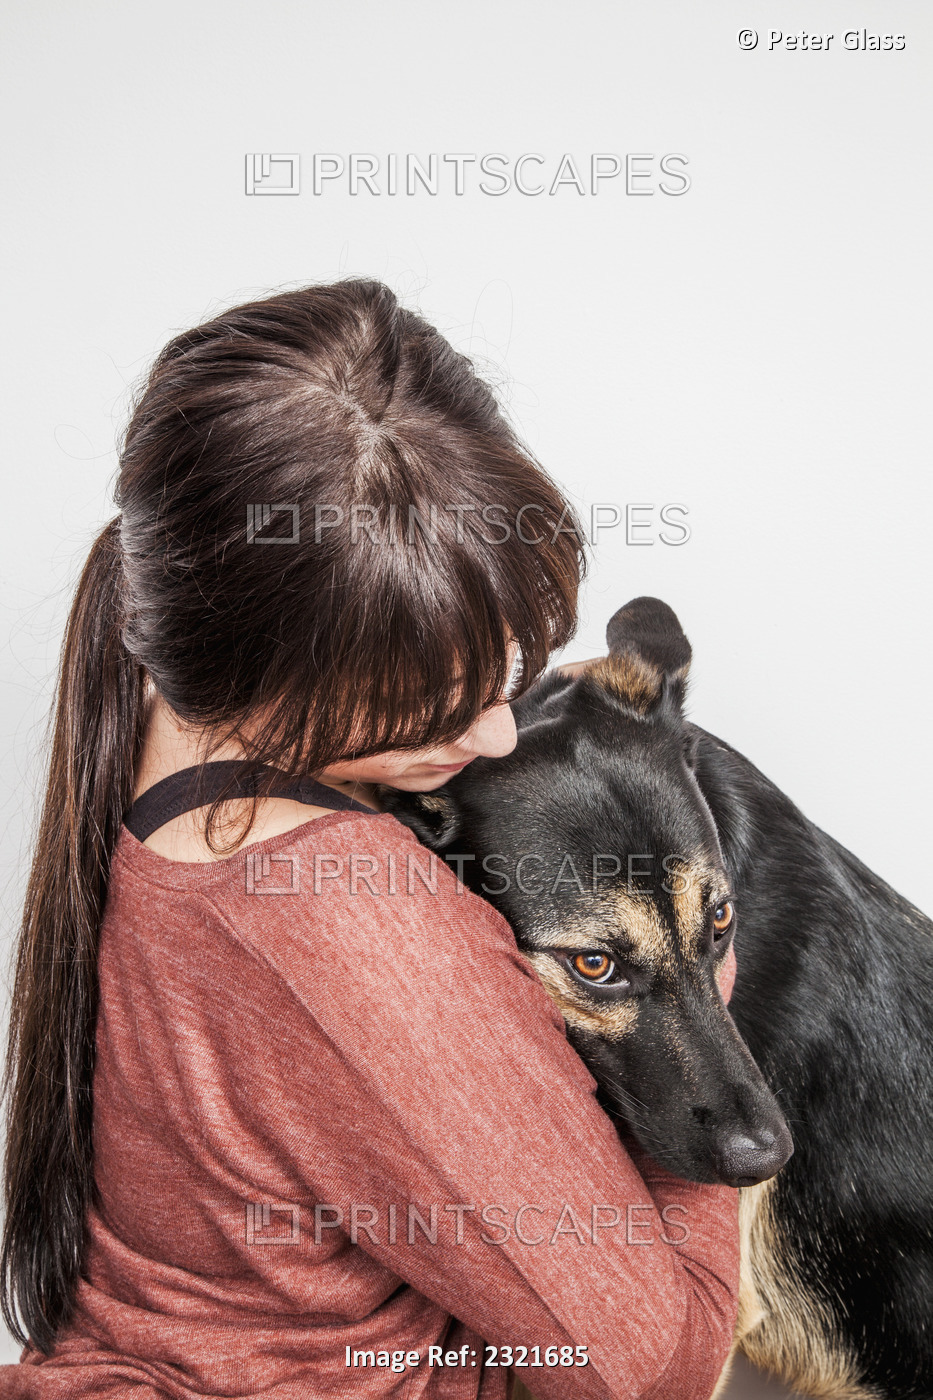 Teenage girl with her dog; Connecticut united states of america